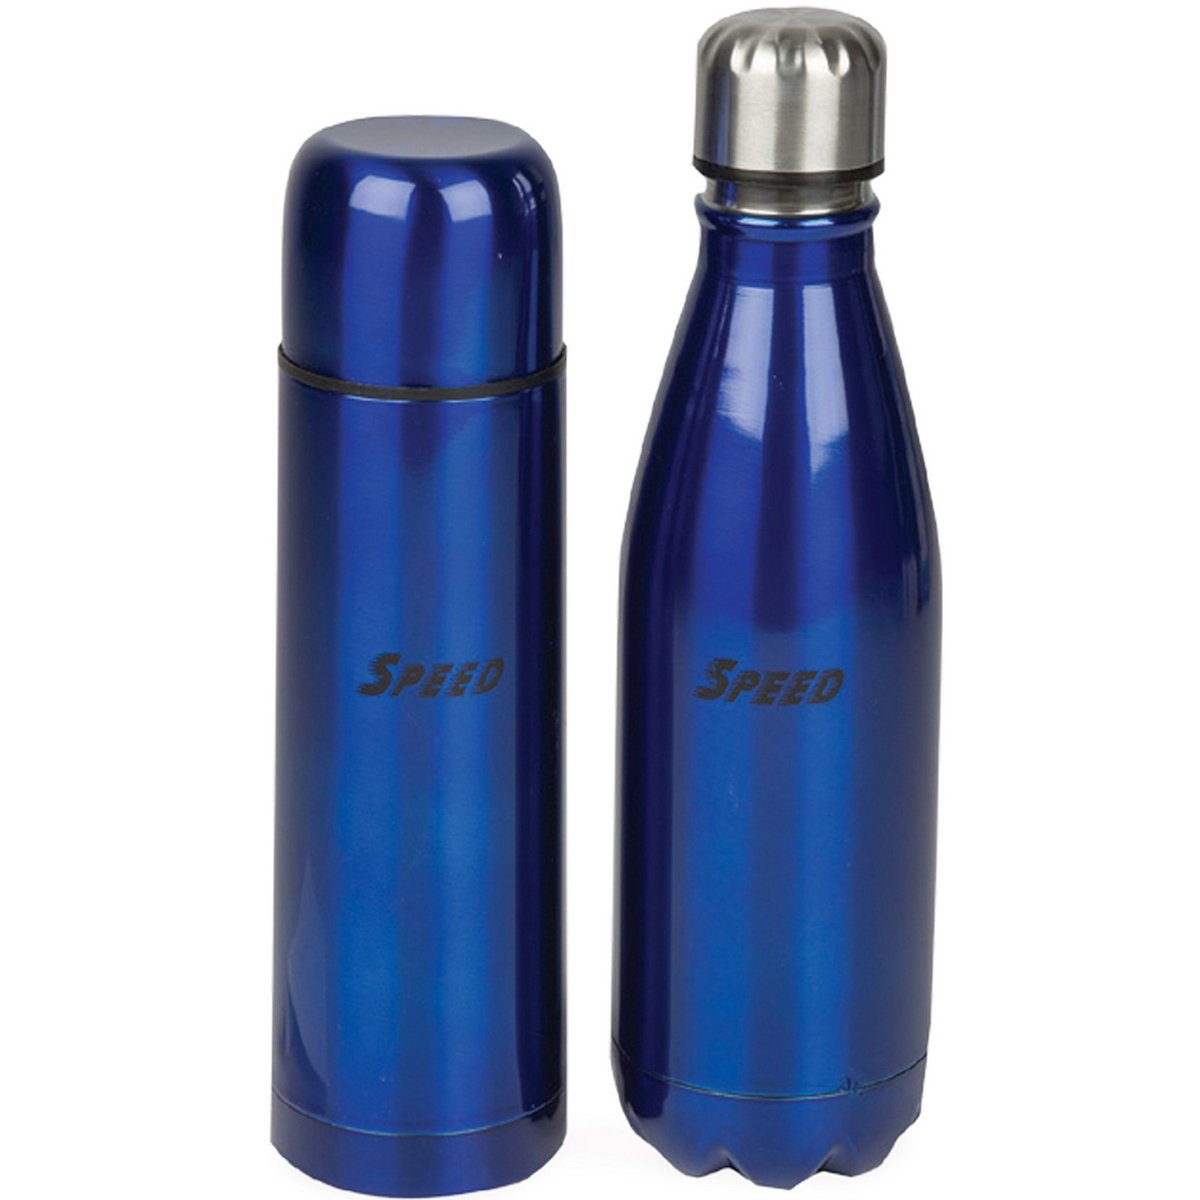 Speed Stainless Steel Flask 500ml + Cola Bottle 500ml Assorted Color